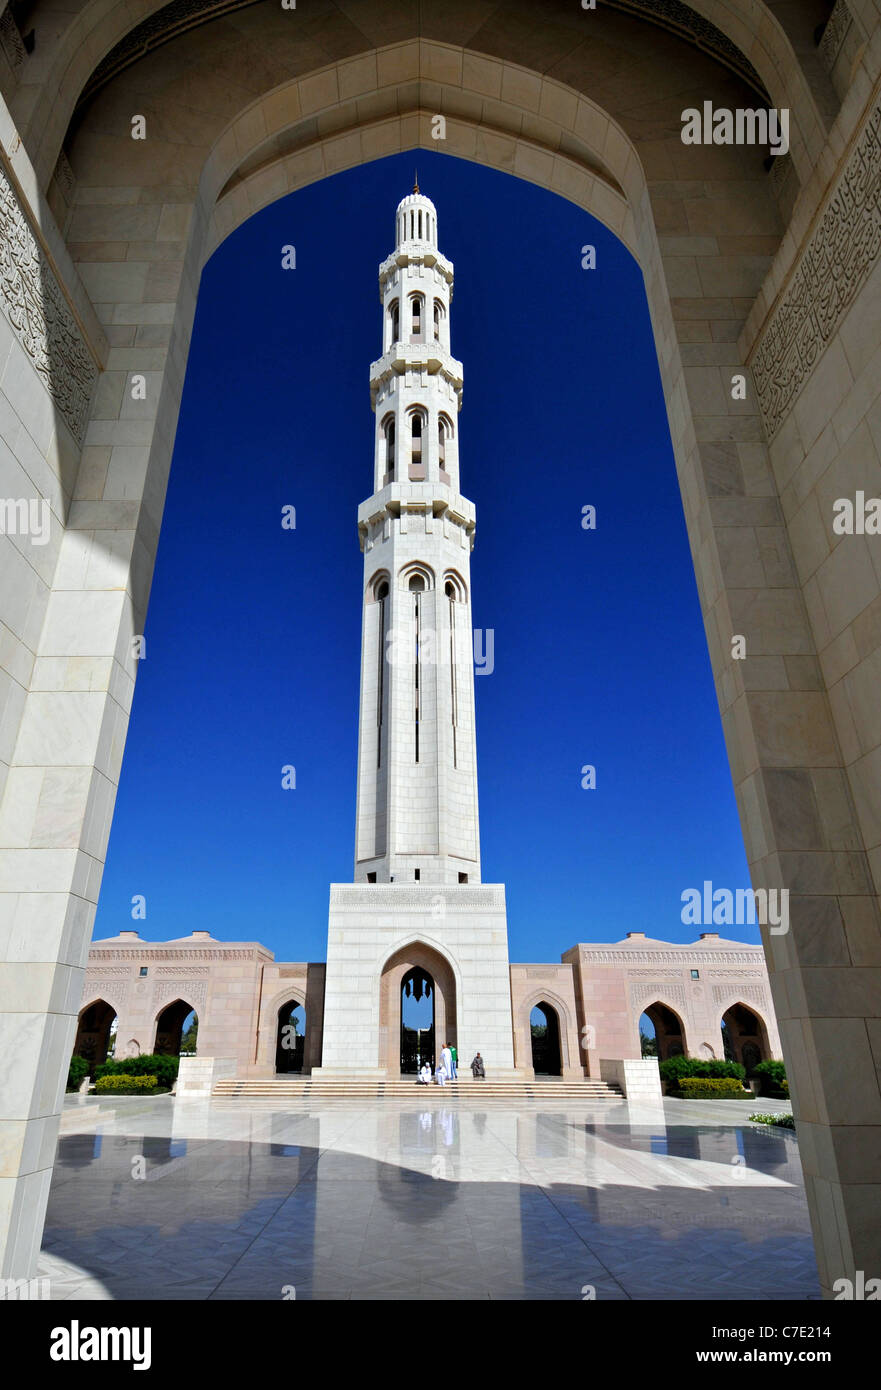 Sultan Qaboos Grand Mosque, the main Mosque in the Sultanate of Oman. Stock Photo